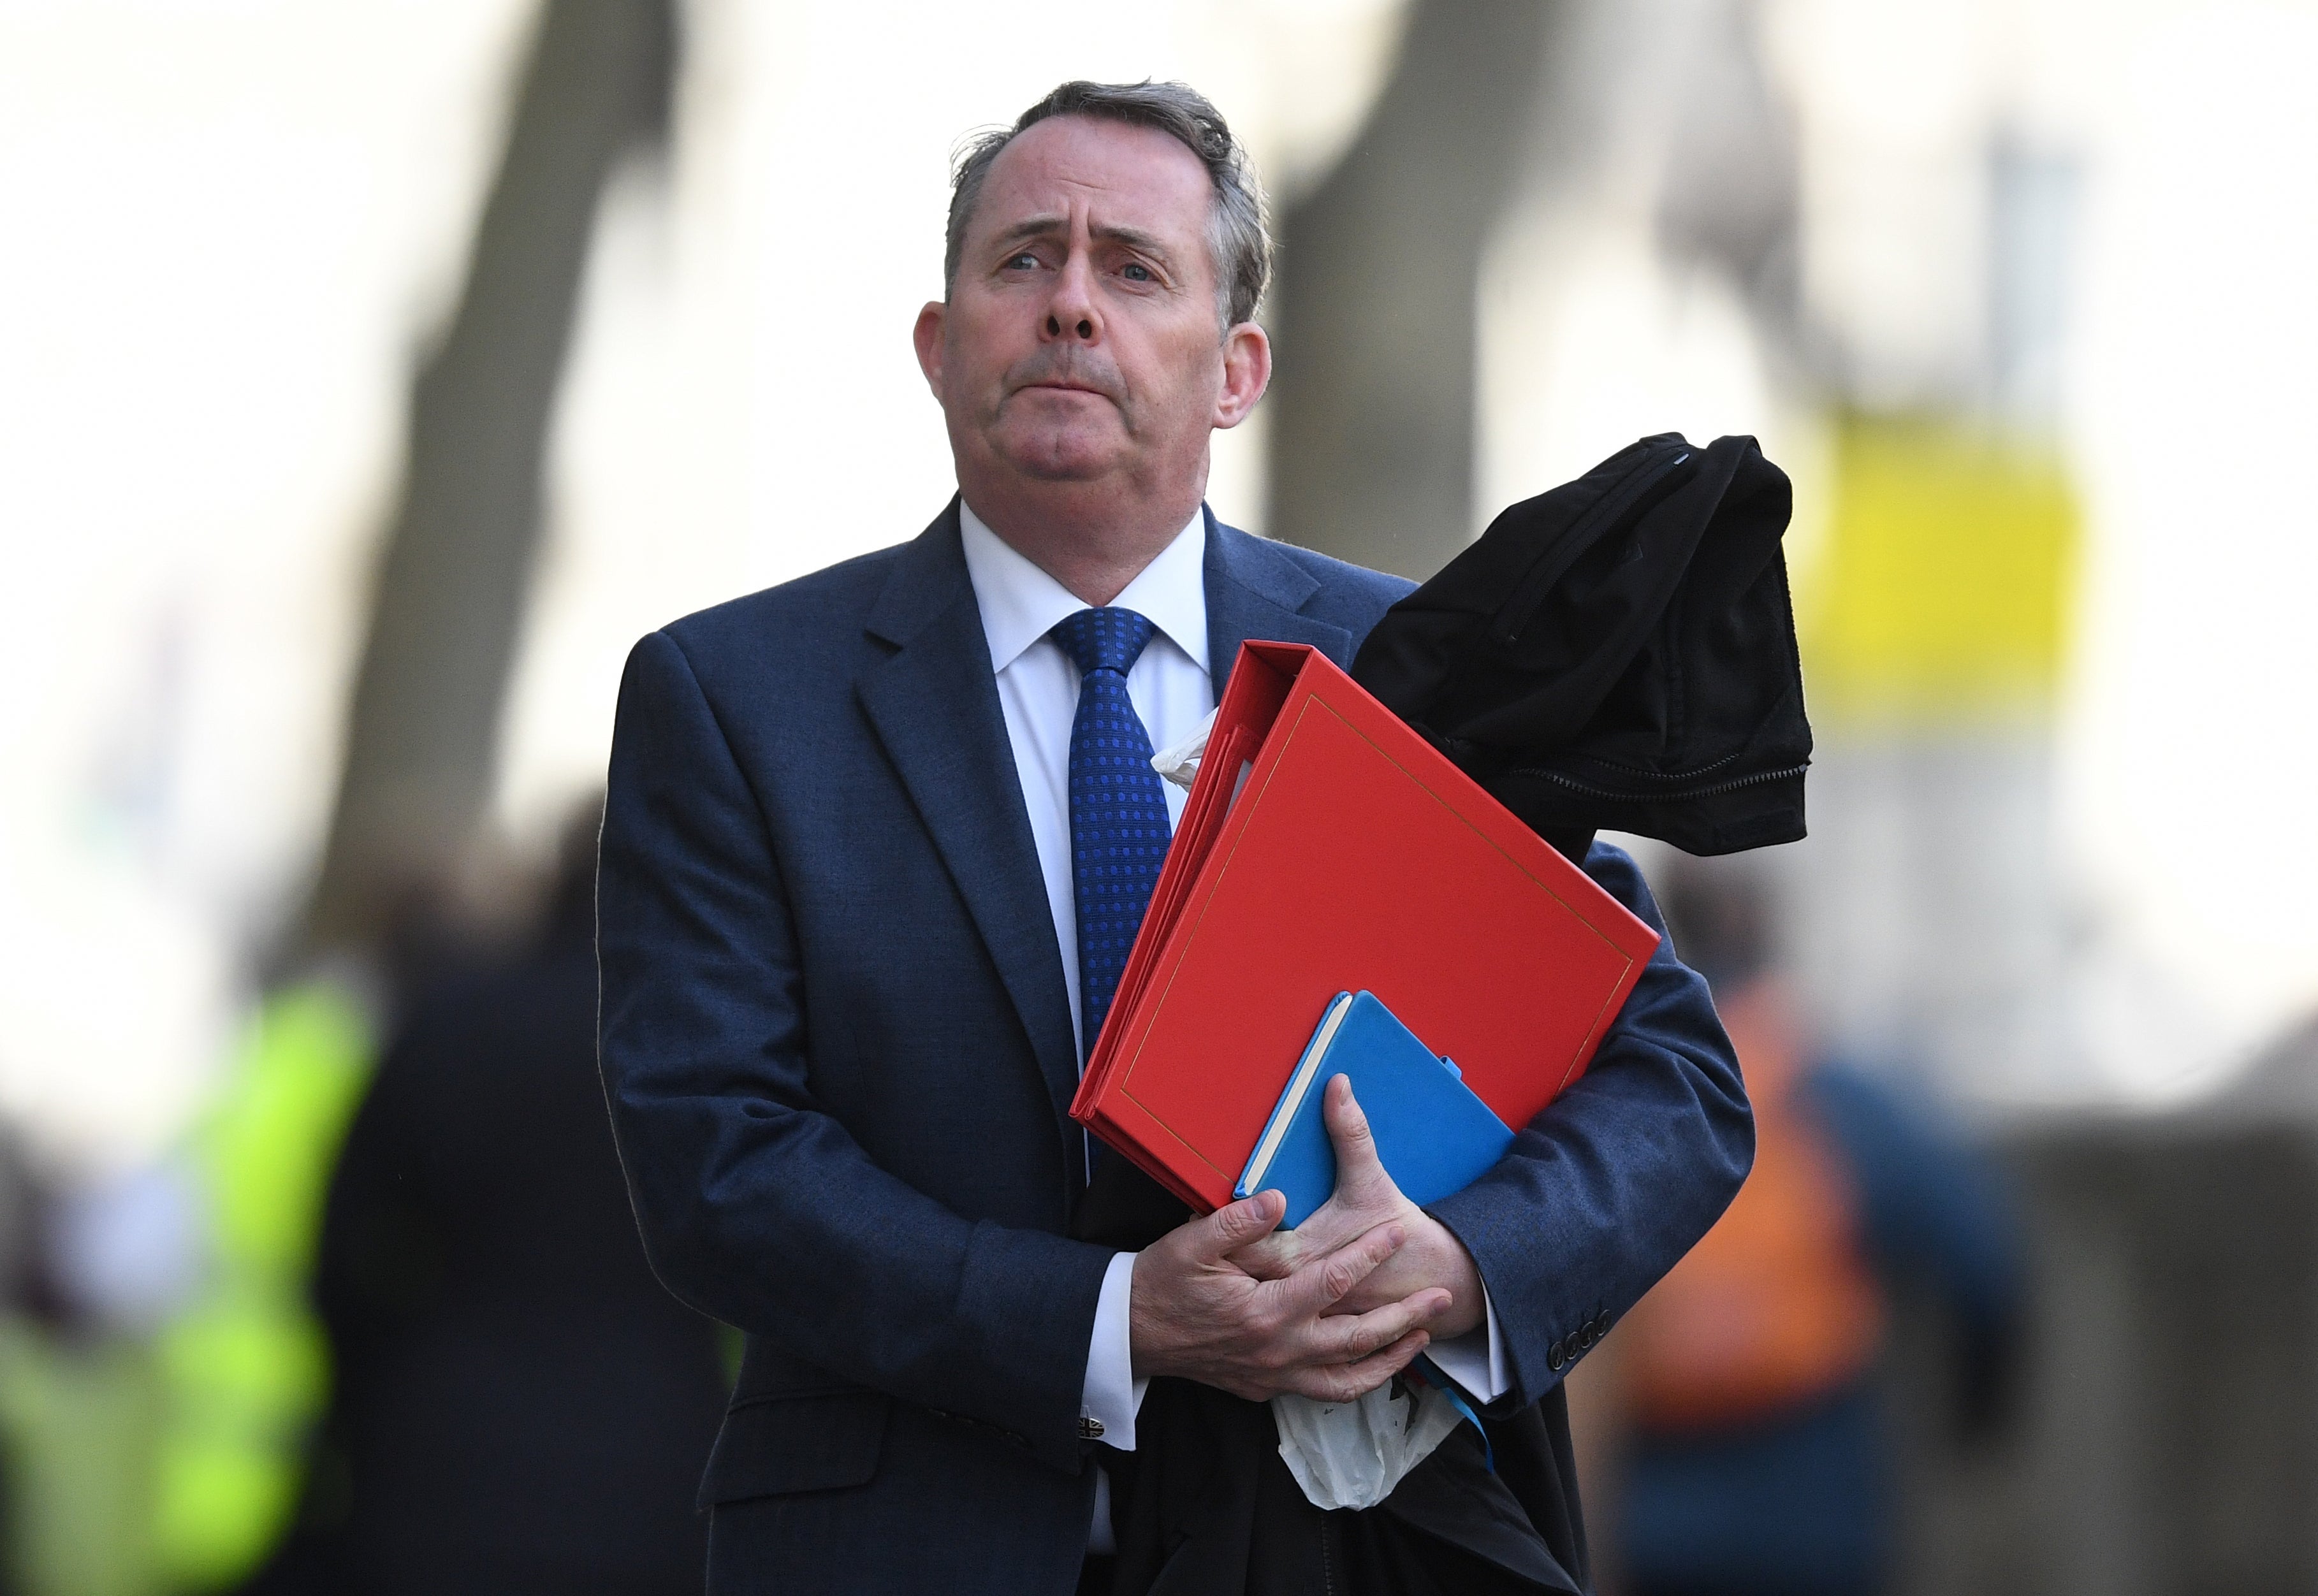 Liam Fox did not make the final round